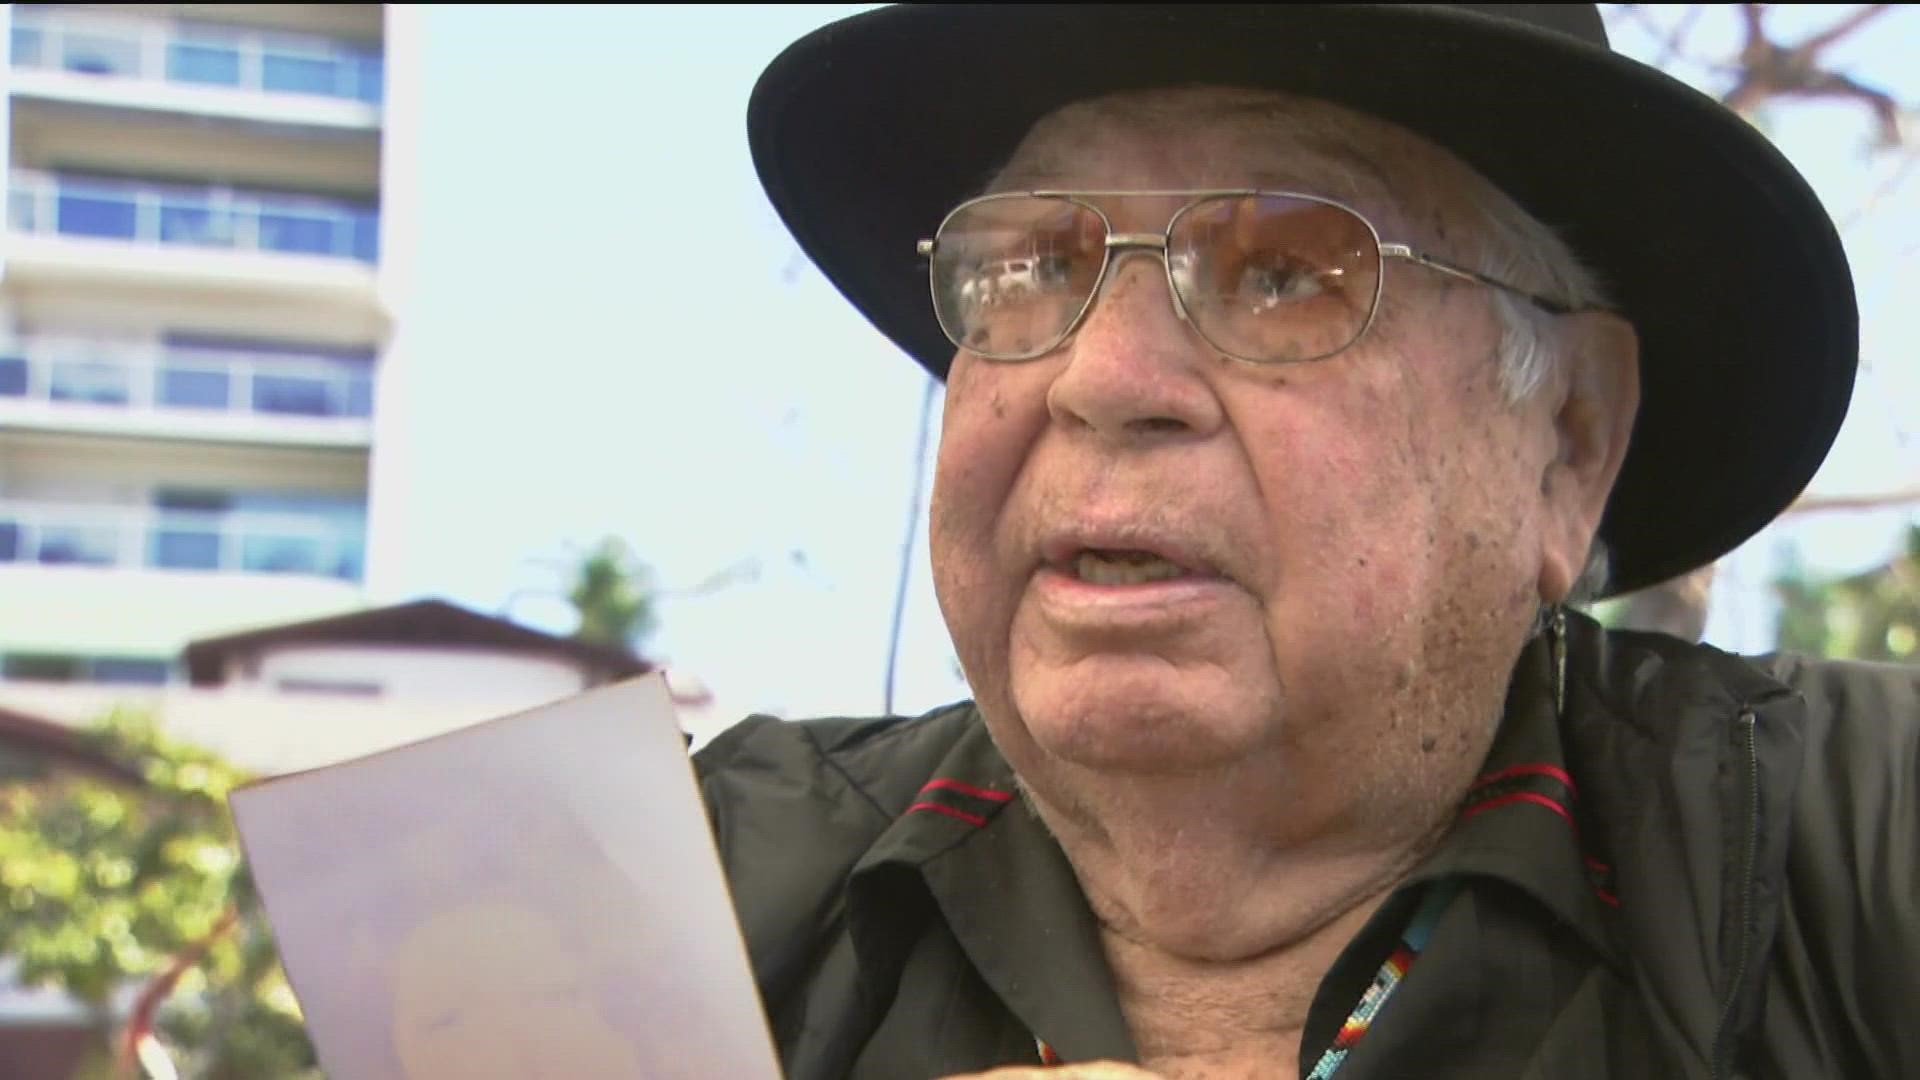 Tribal elder Randy Edmonds wants San Diego to learn from past injustices including the death of his mother.